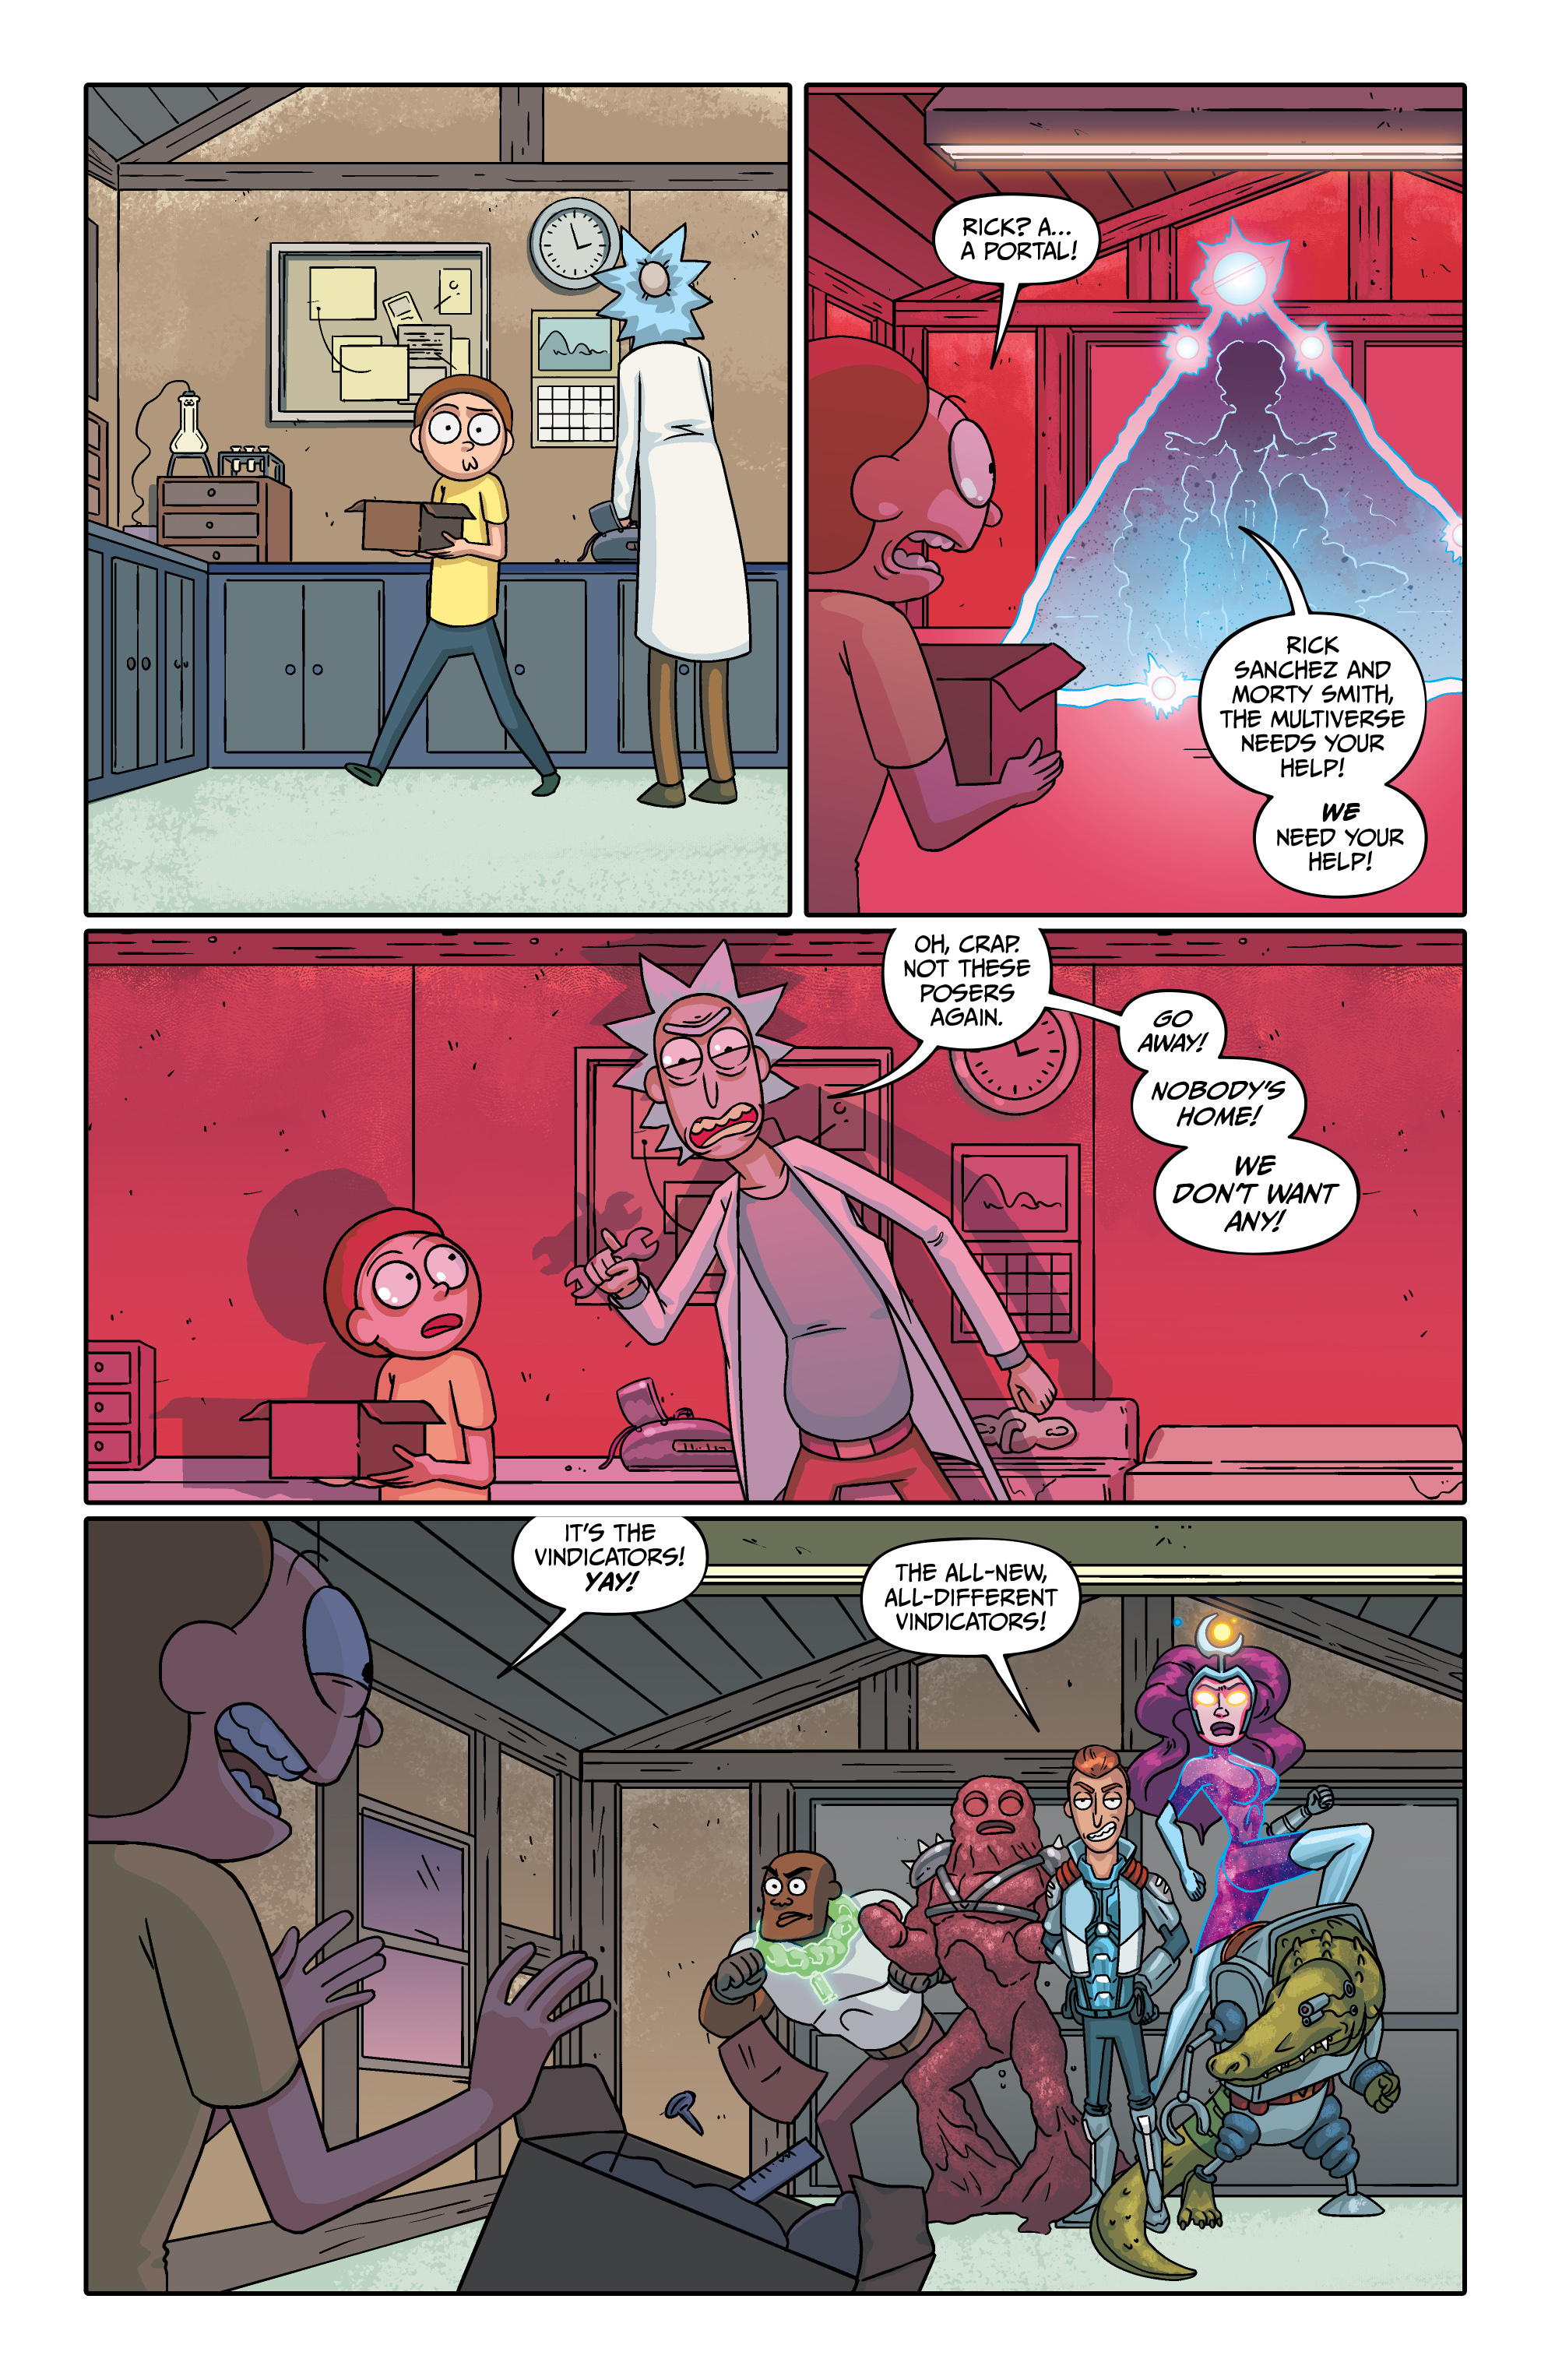 Rick And Morty Presents The Vindicators (2018): Chapter 1 - Page 3